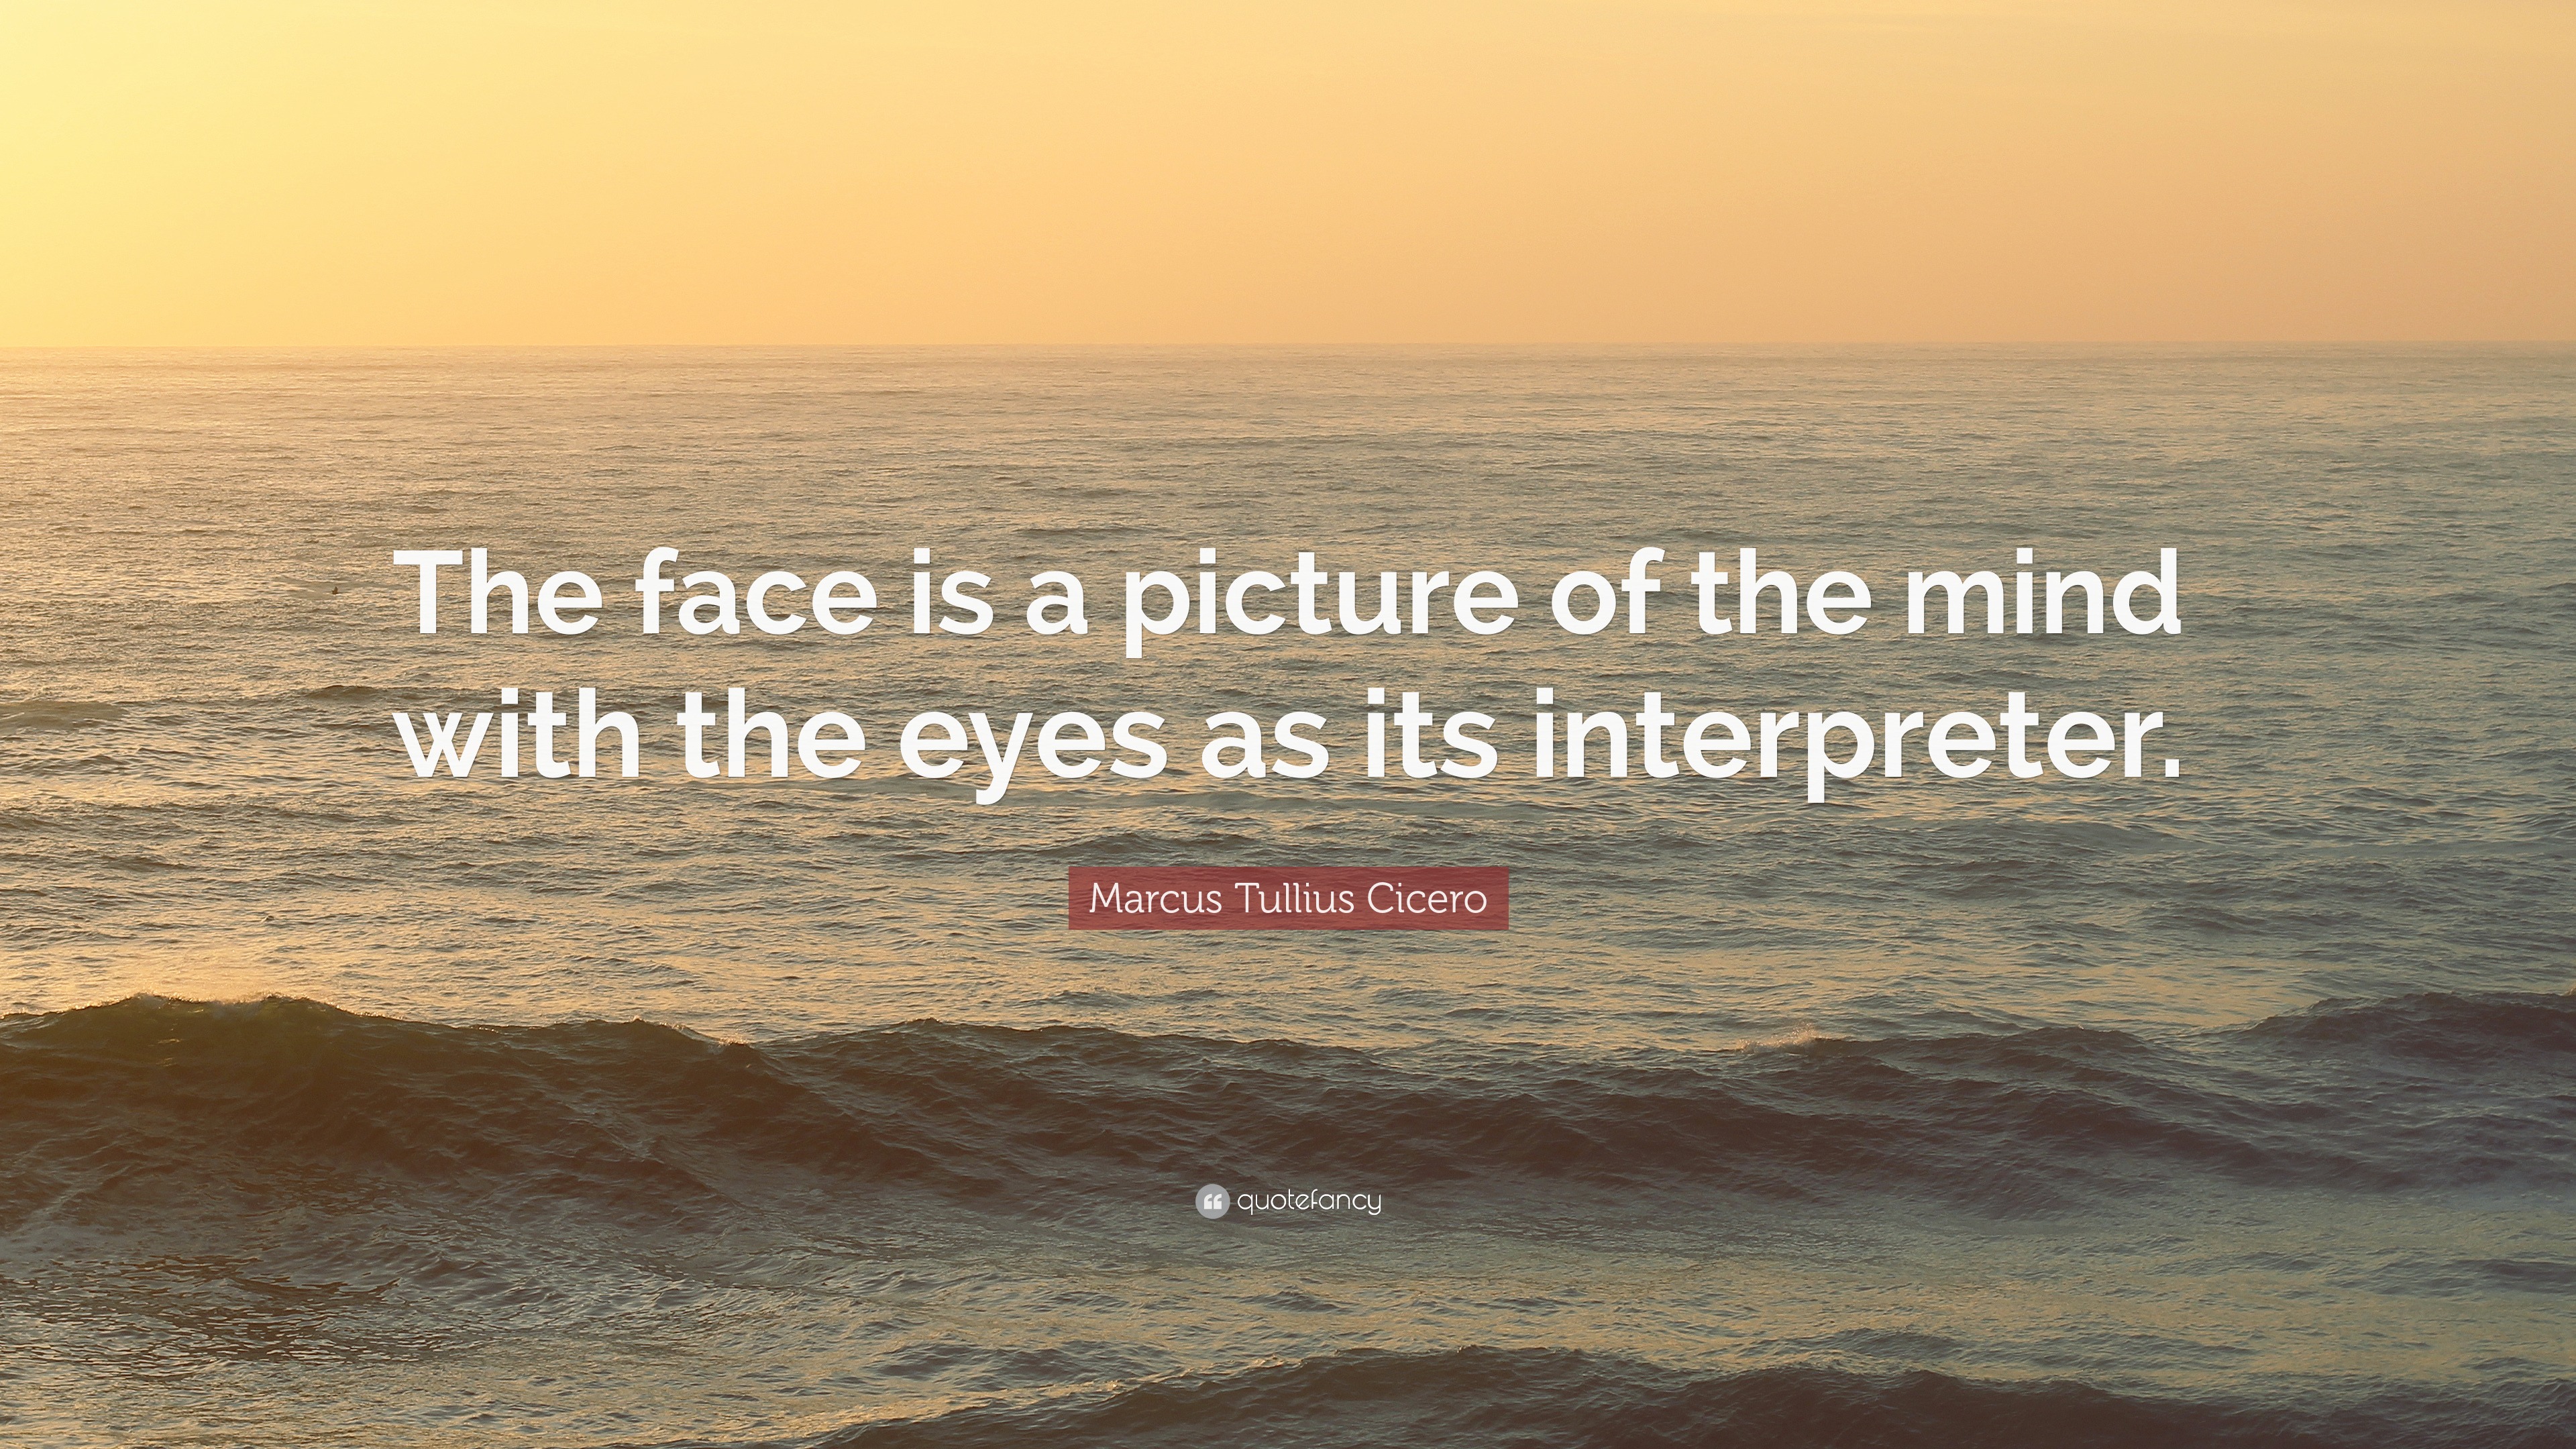 Marcus Tullius Cicero Quote: “The face is a picture of the mind with ...